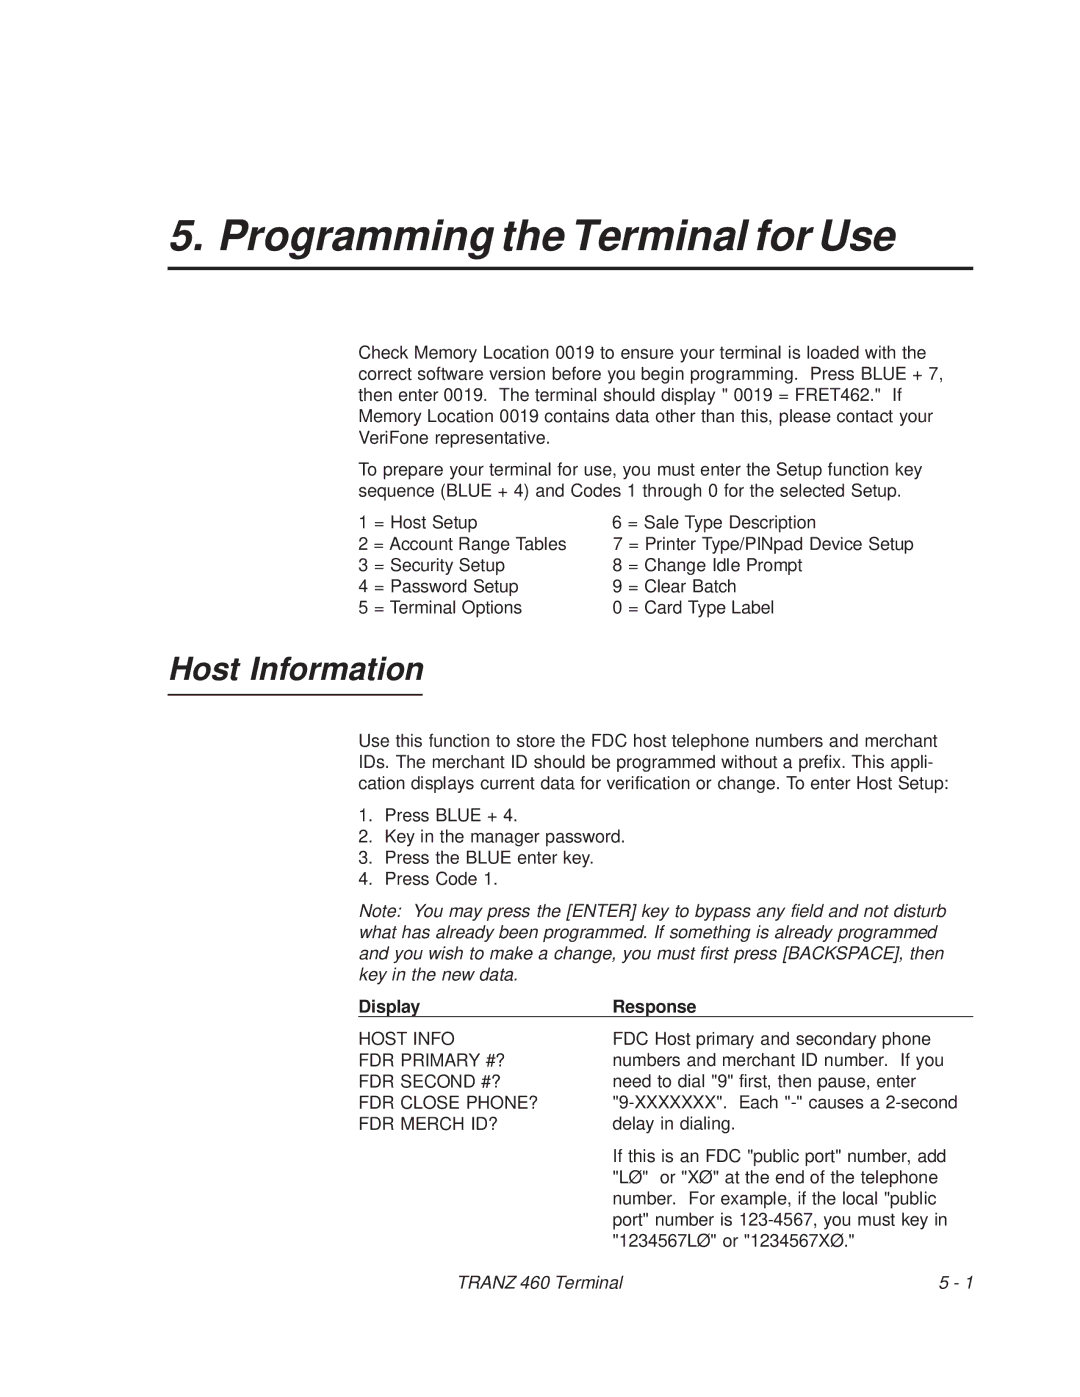 VeriFone TRANZ 460 manual Programming the Terminal for Use, Host Information, DisplayResponse 